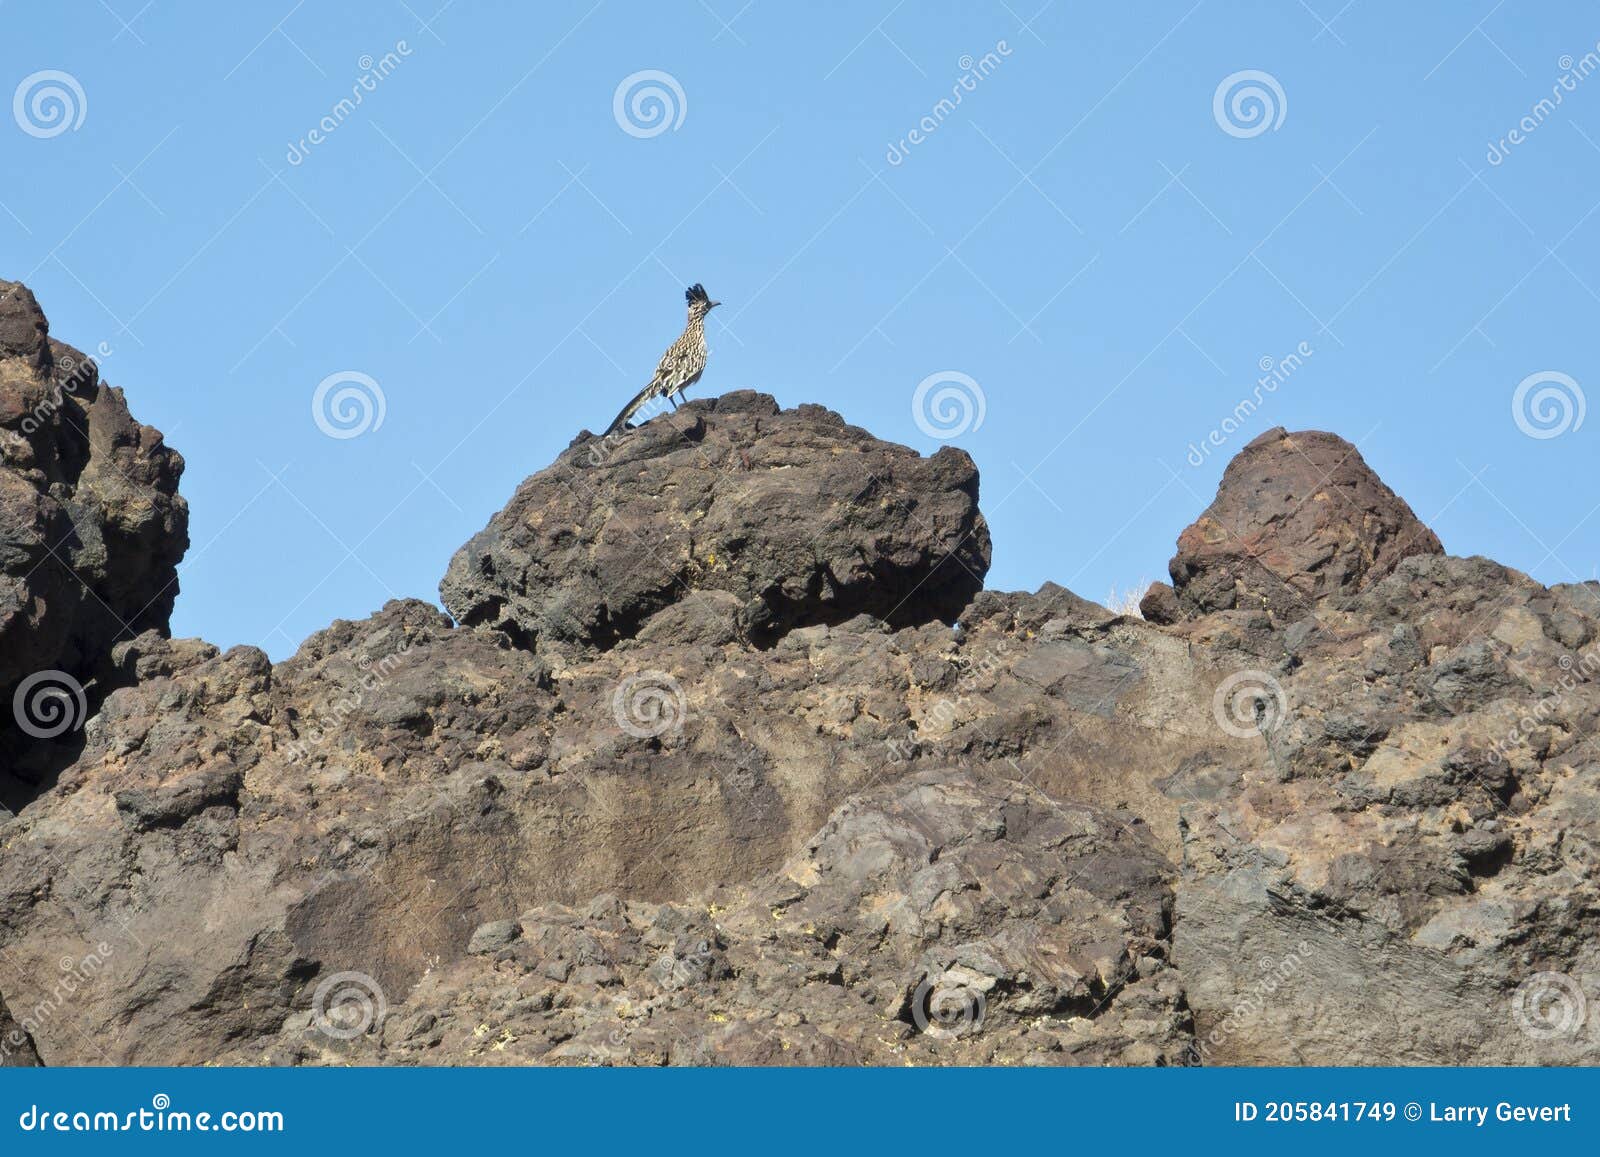 roadrunner on a rock outcropping